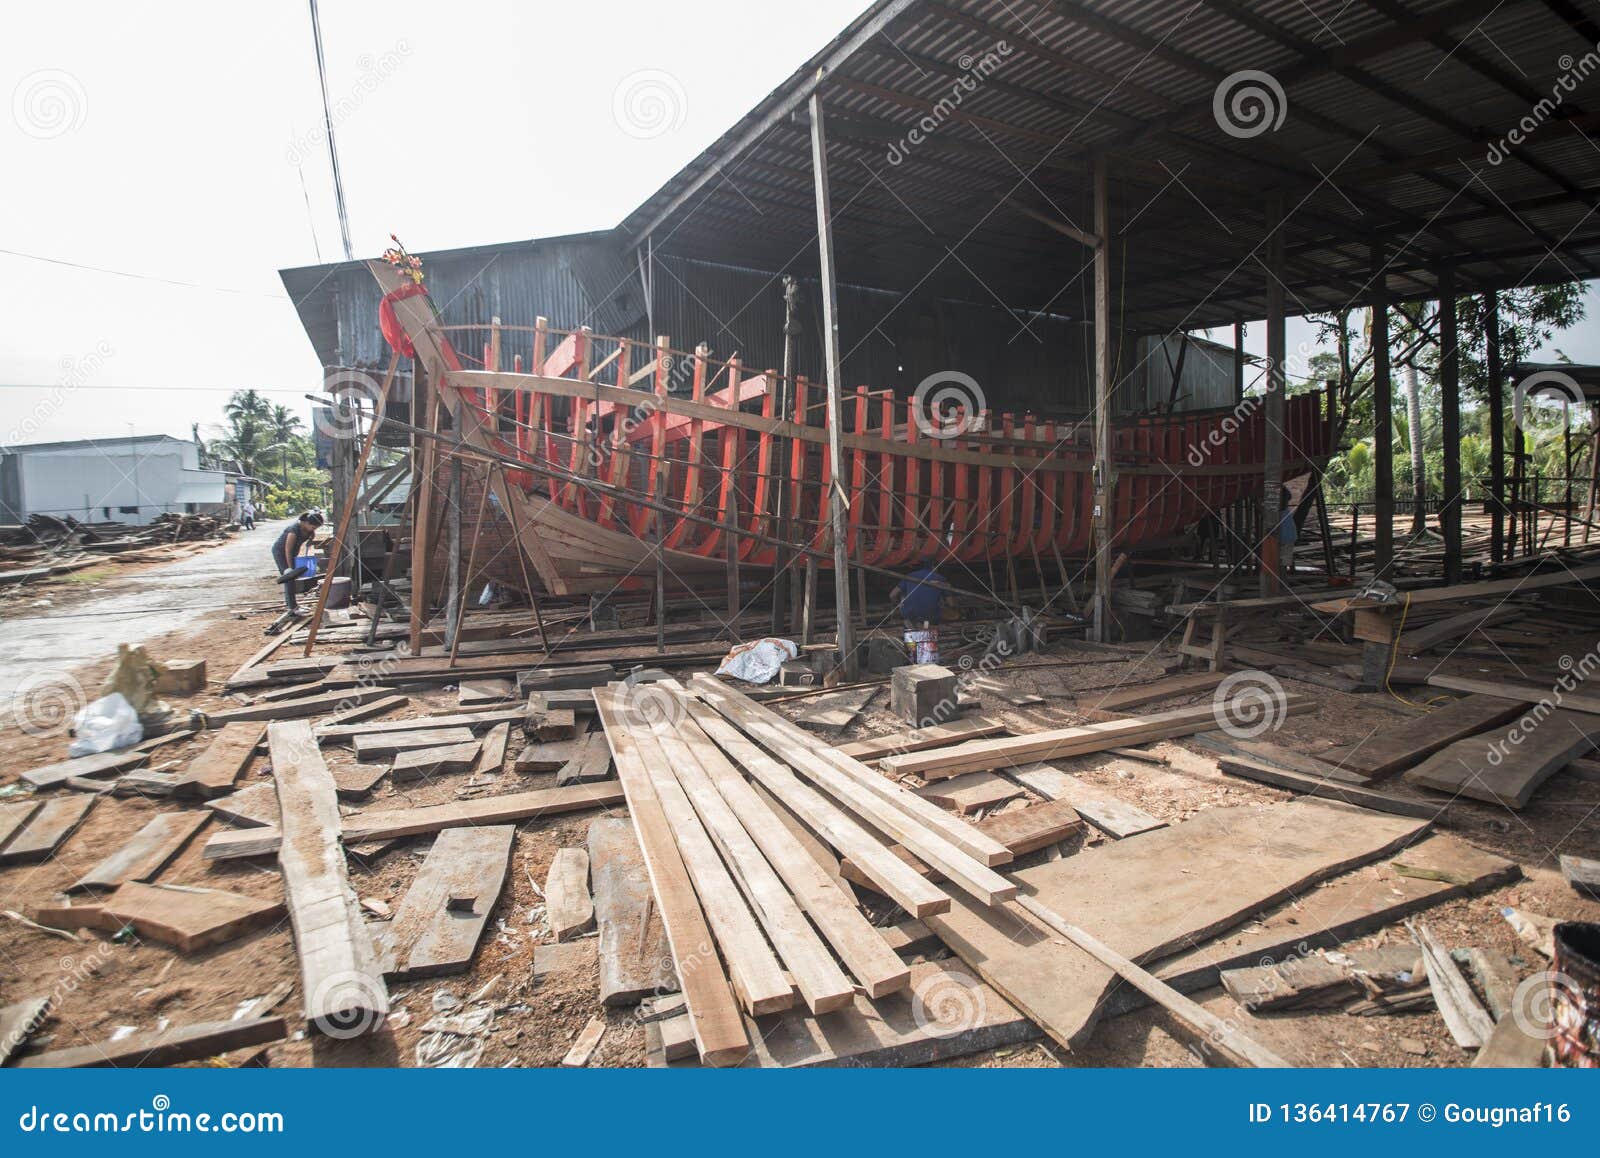 vietnamese workers build a large wooden boat in nga bay in